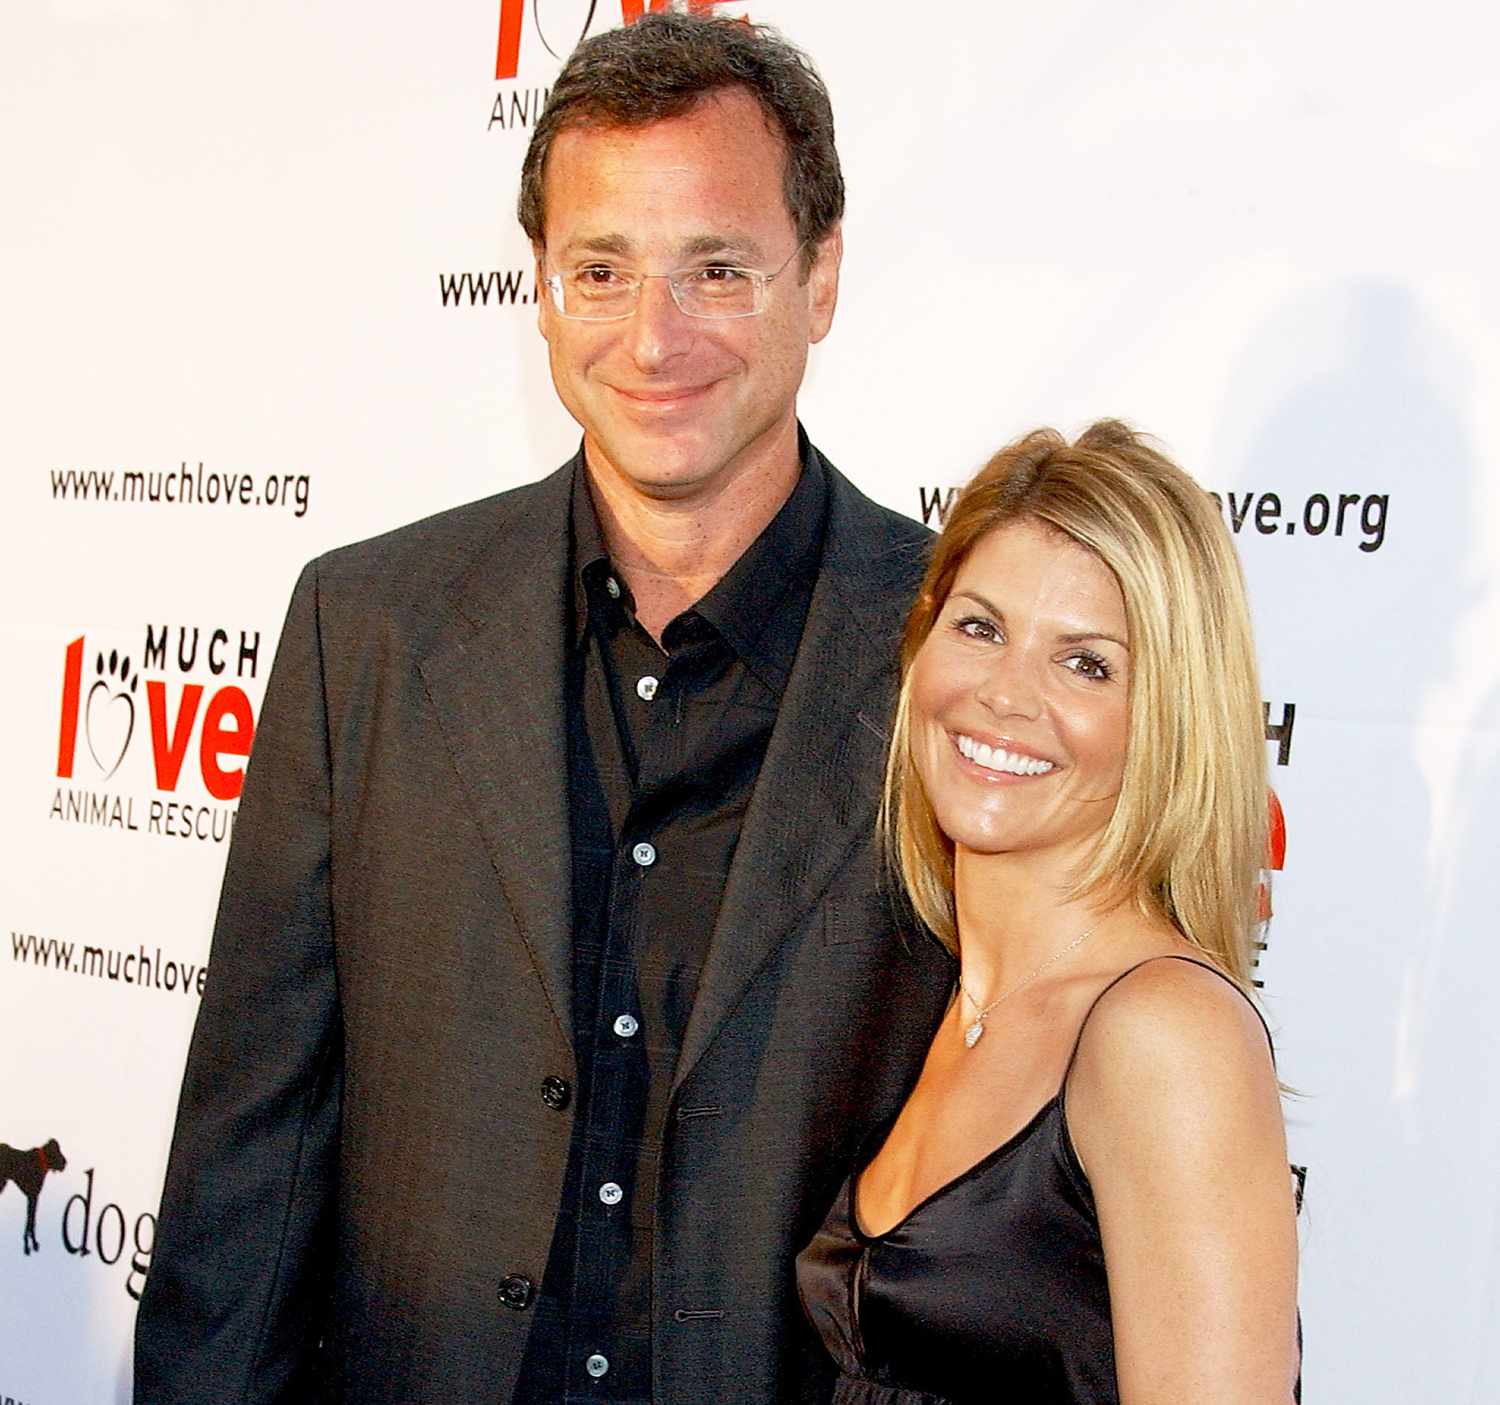 Bob Saget and actress Lori Loughlin arrive at the "Much Love Animal Rescue Benefit" at the Playboy Mansion on July 14, 2007 in Los Angeles, California.